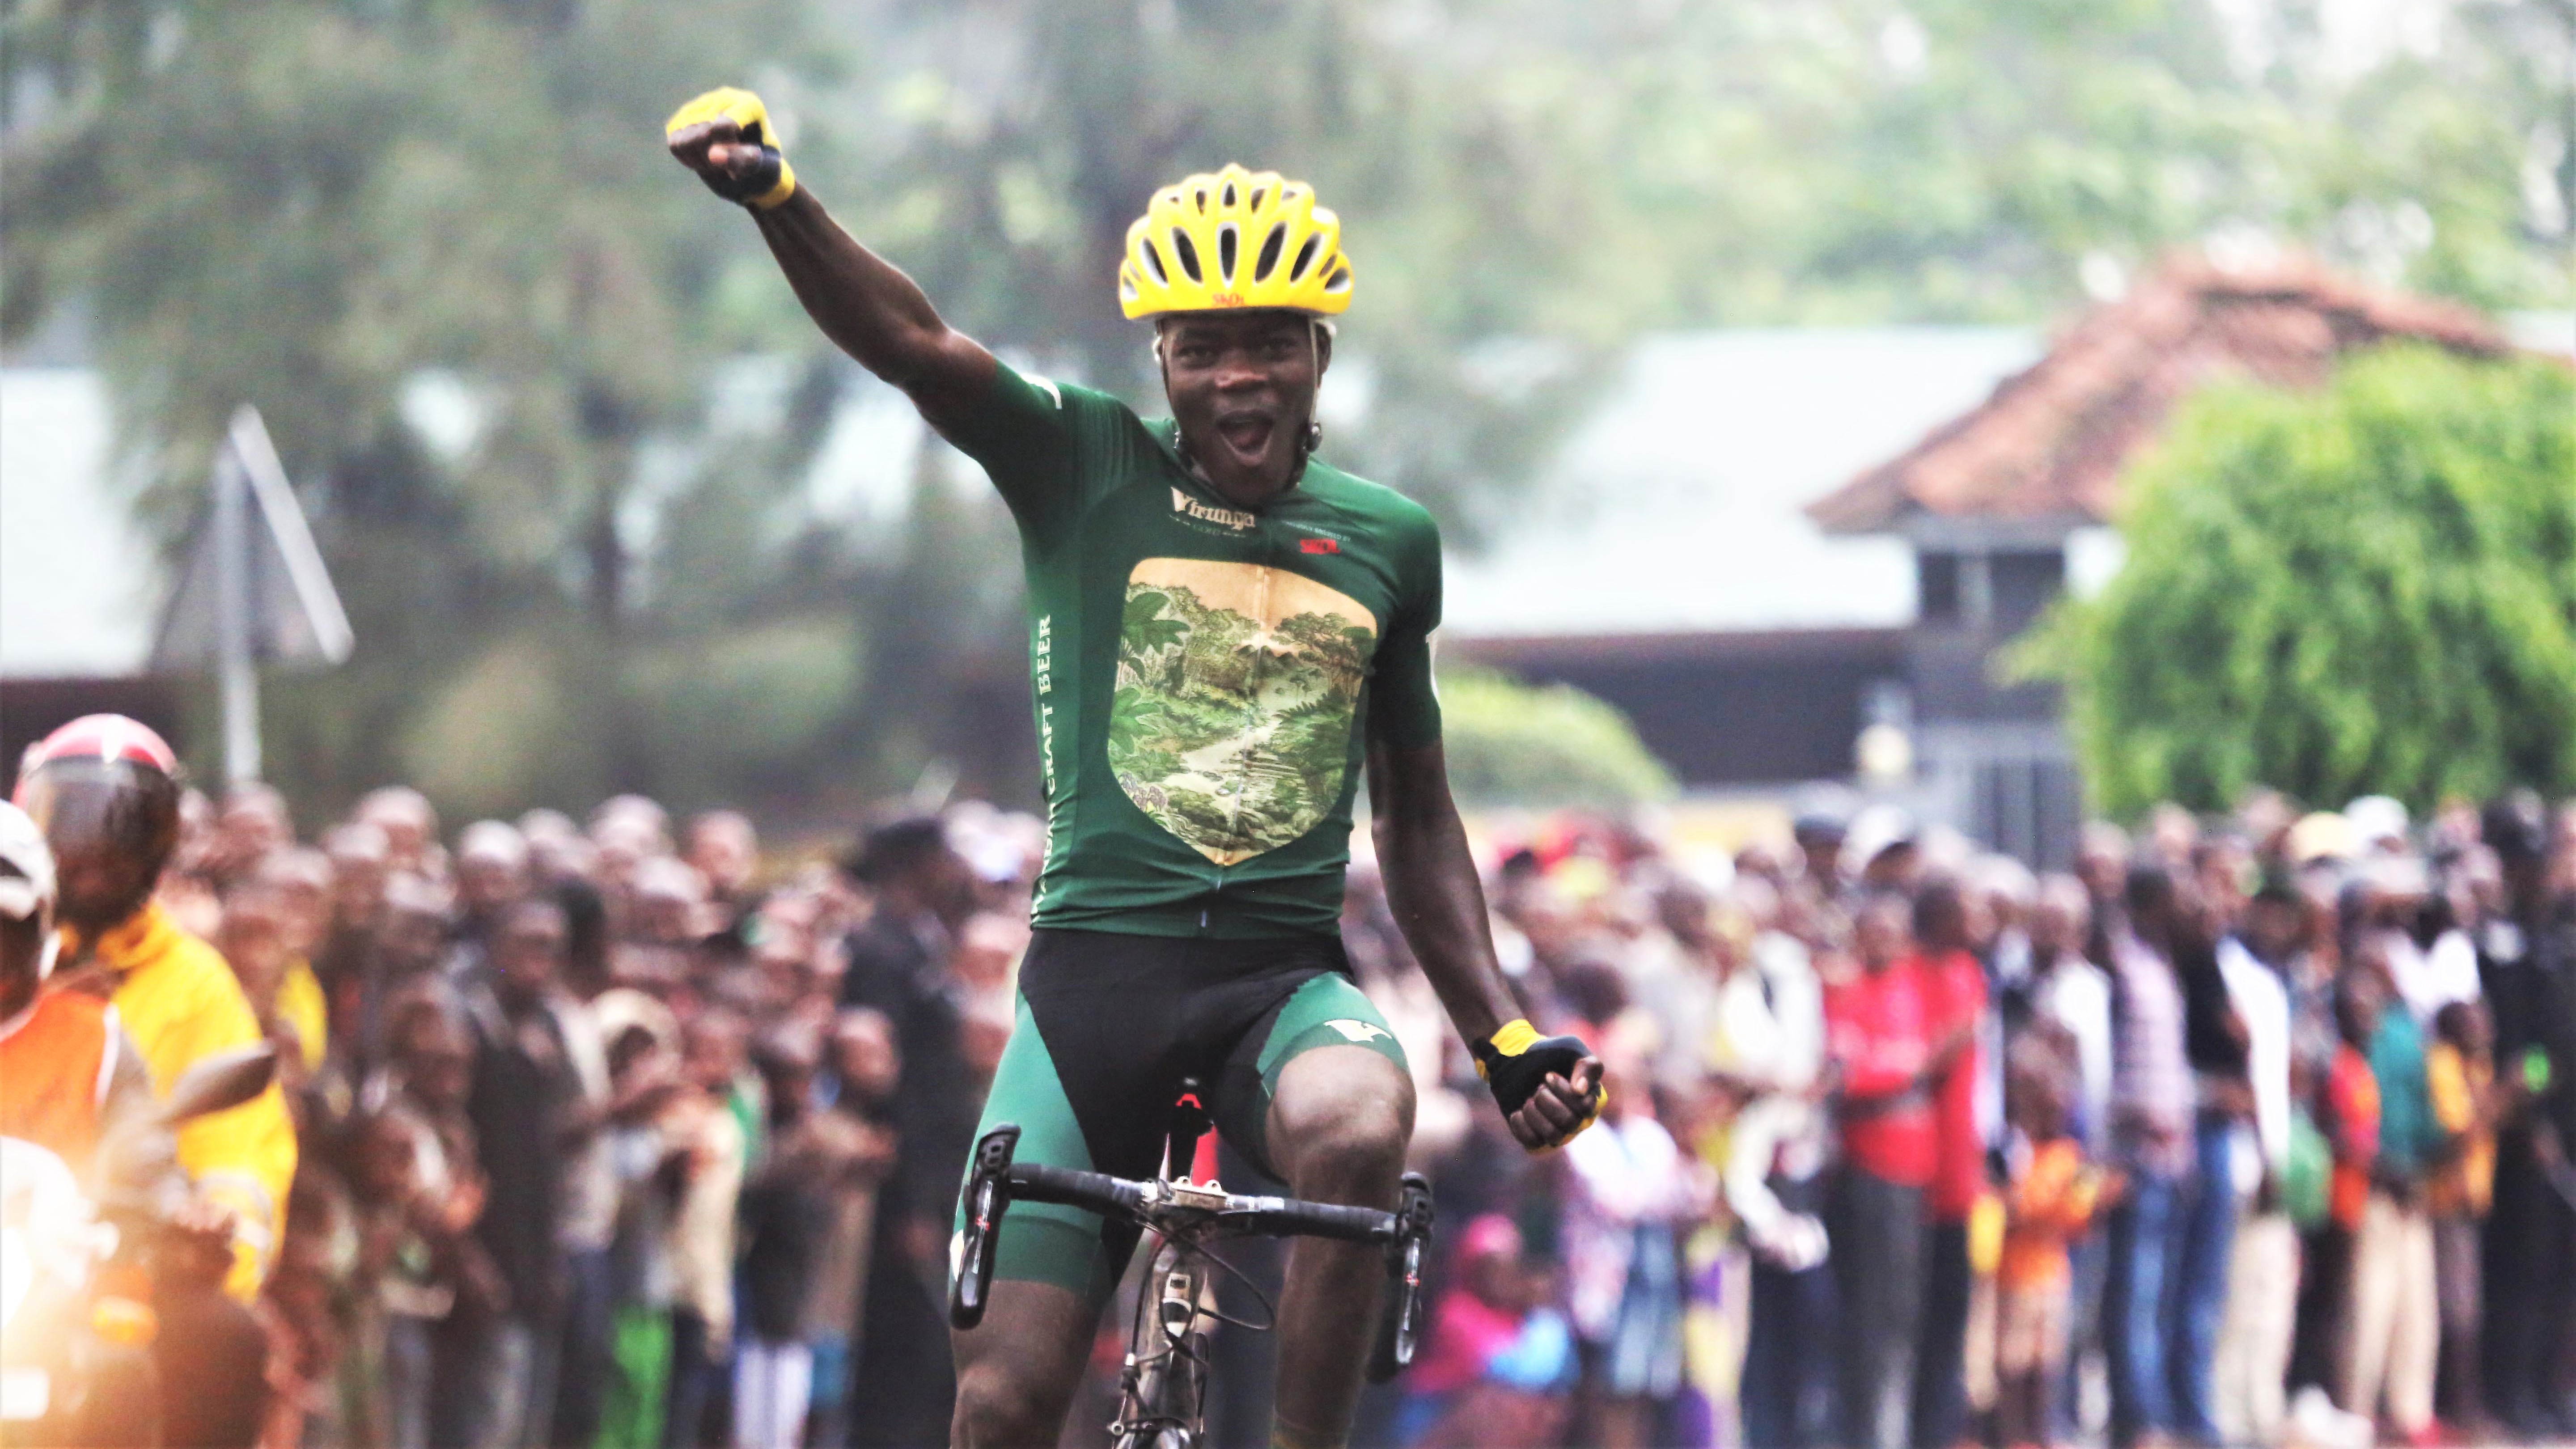 Jean Eric Habimana, 19, celebrates his solo finish after crossing the line to win the inaugural Heroes Cup in Nyamirambo on Sunday. Photo: 